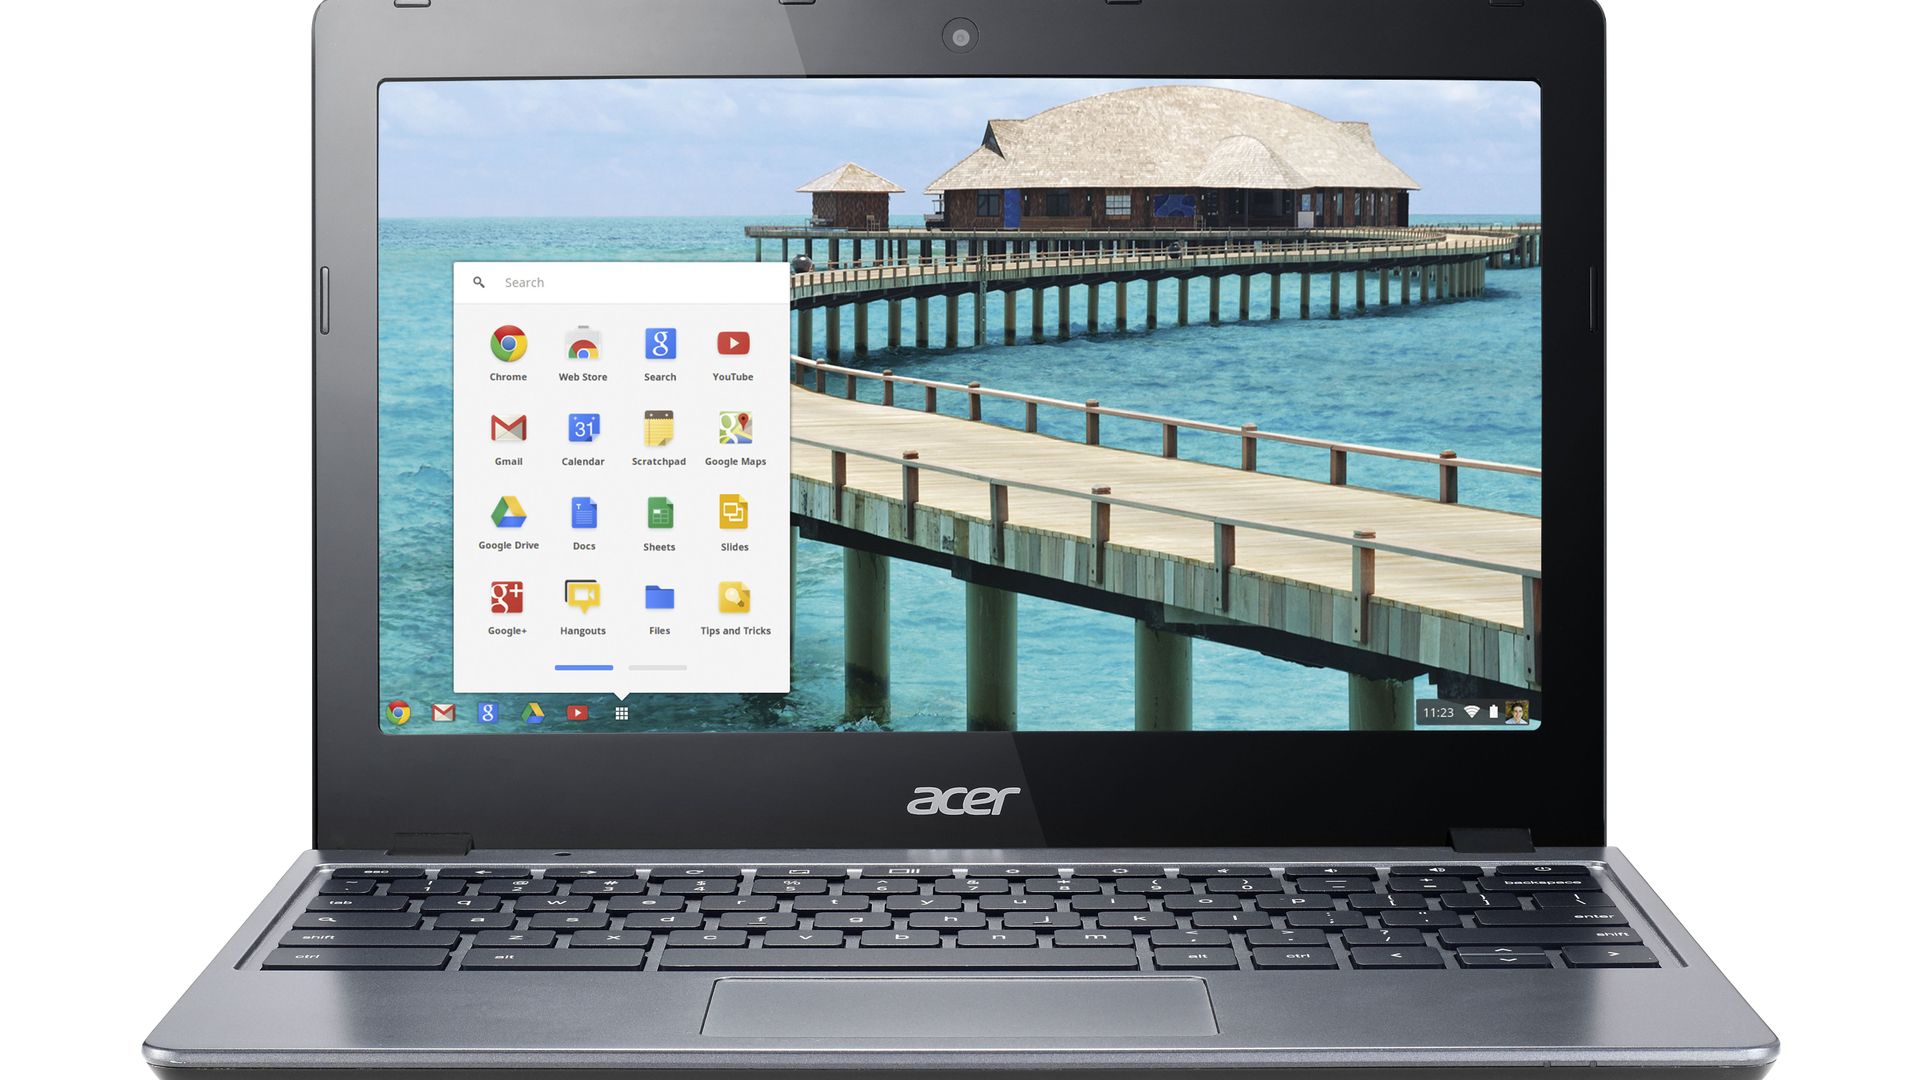 New Acer Chromebook wants to be your goto without busting your budget